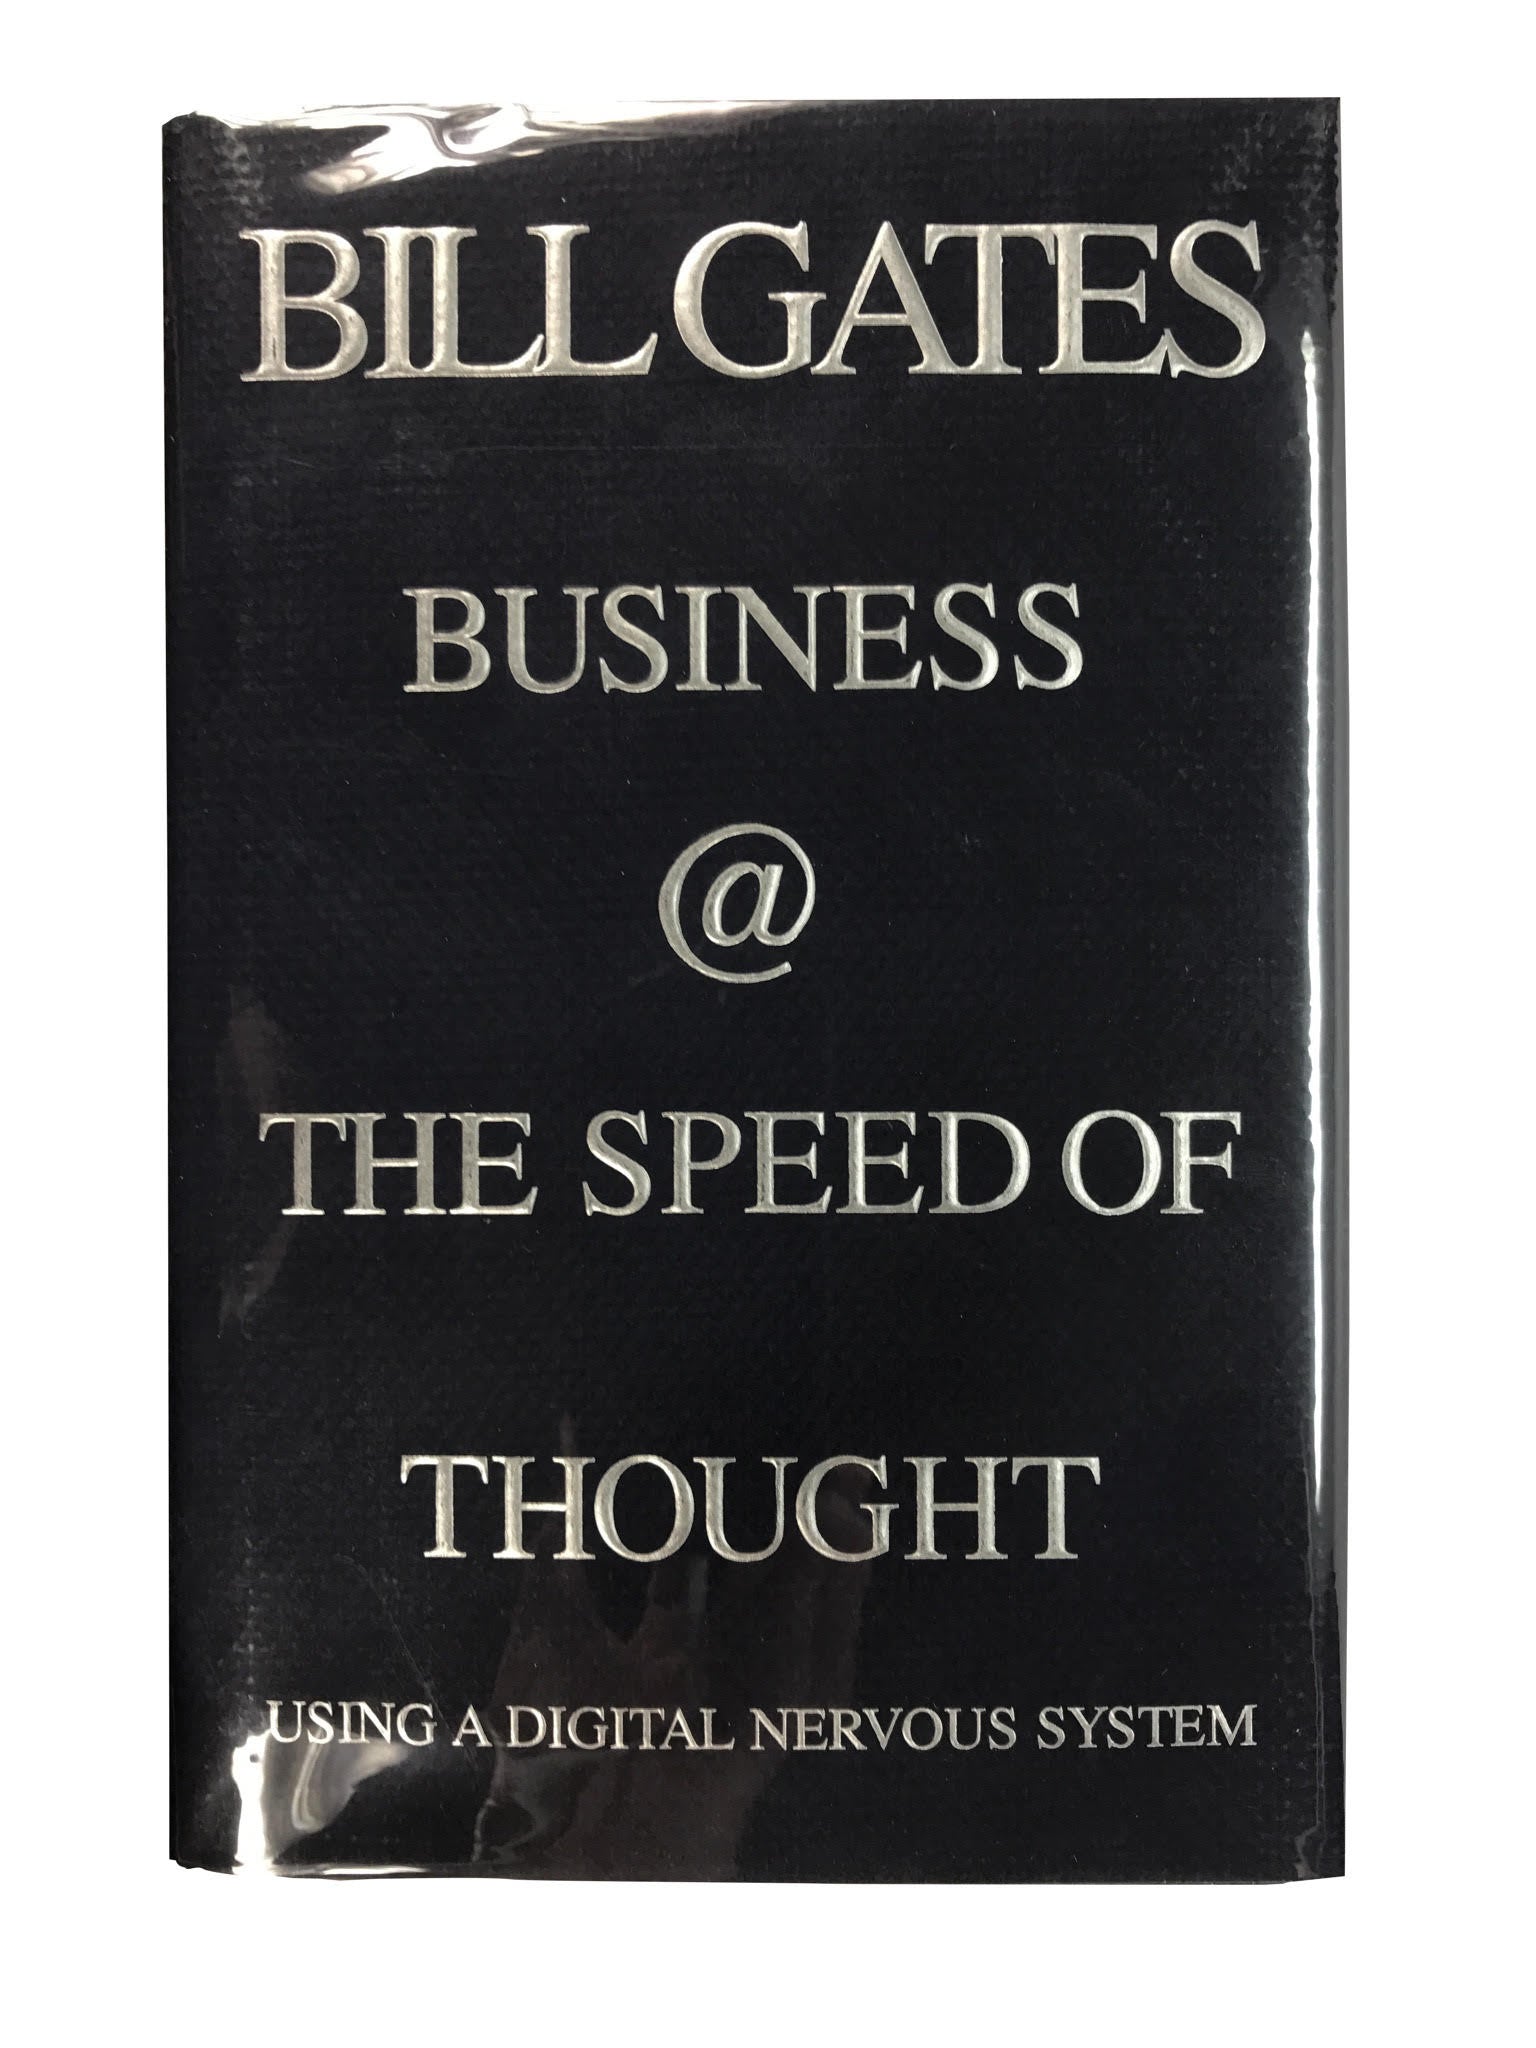 Bill Gates Signed: "Business at the Speed of Thought"